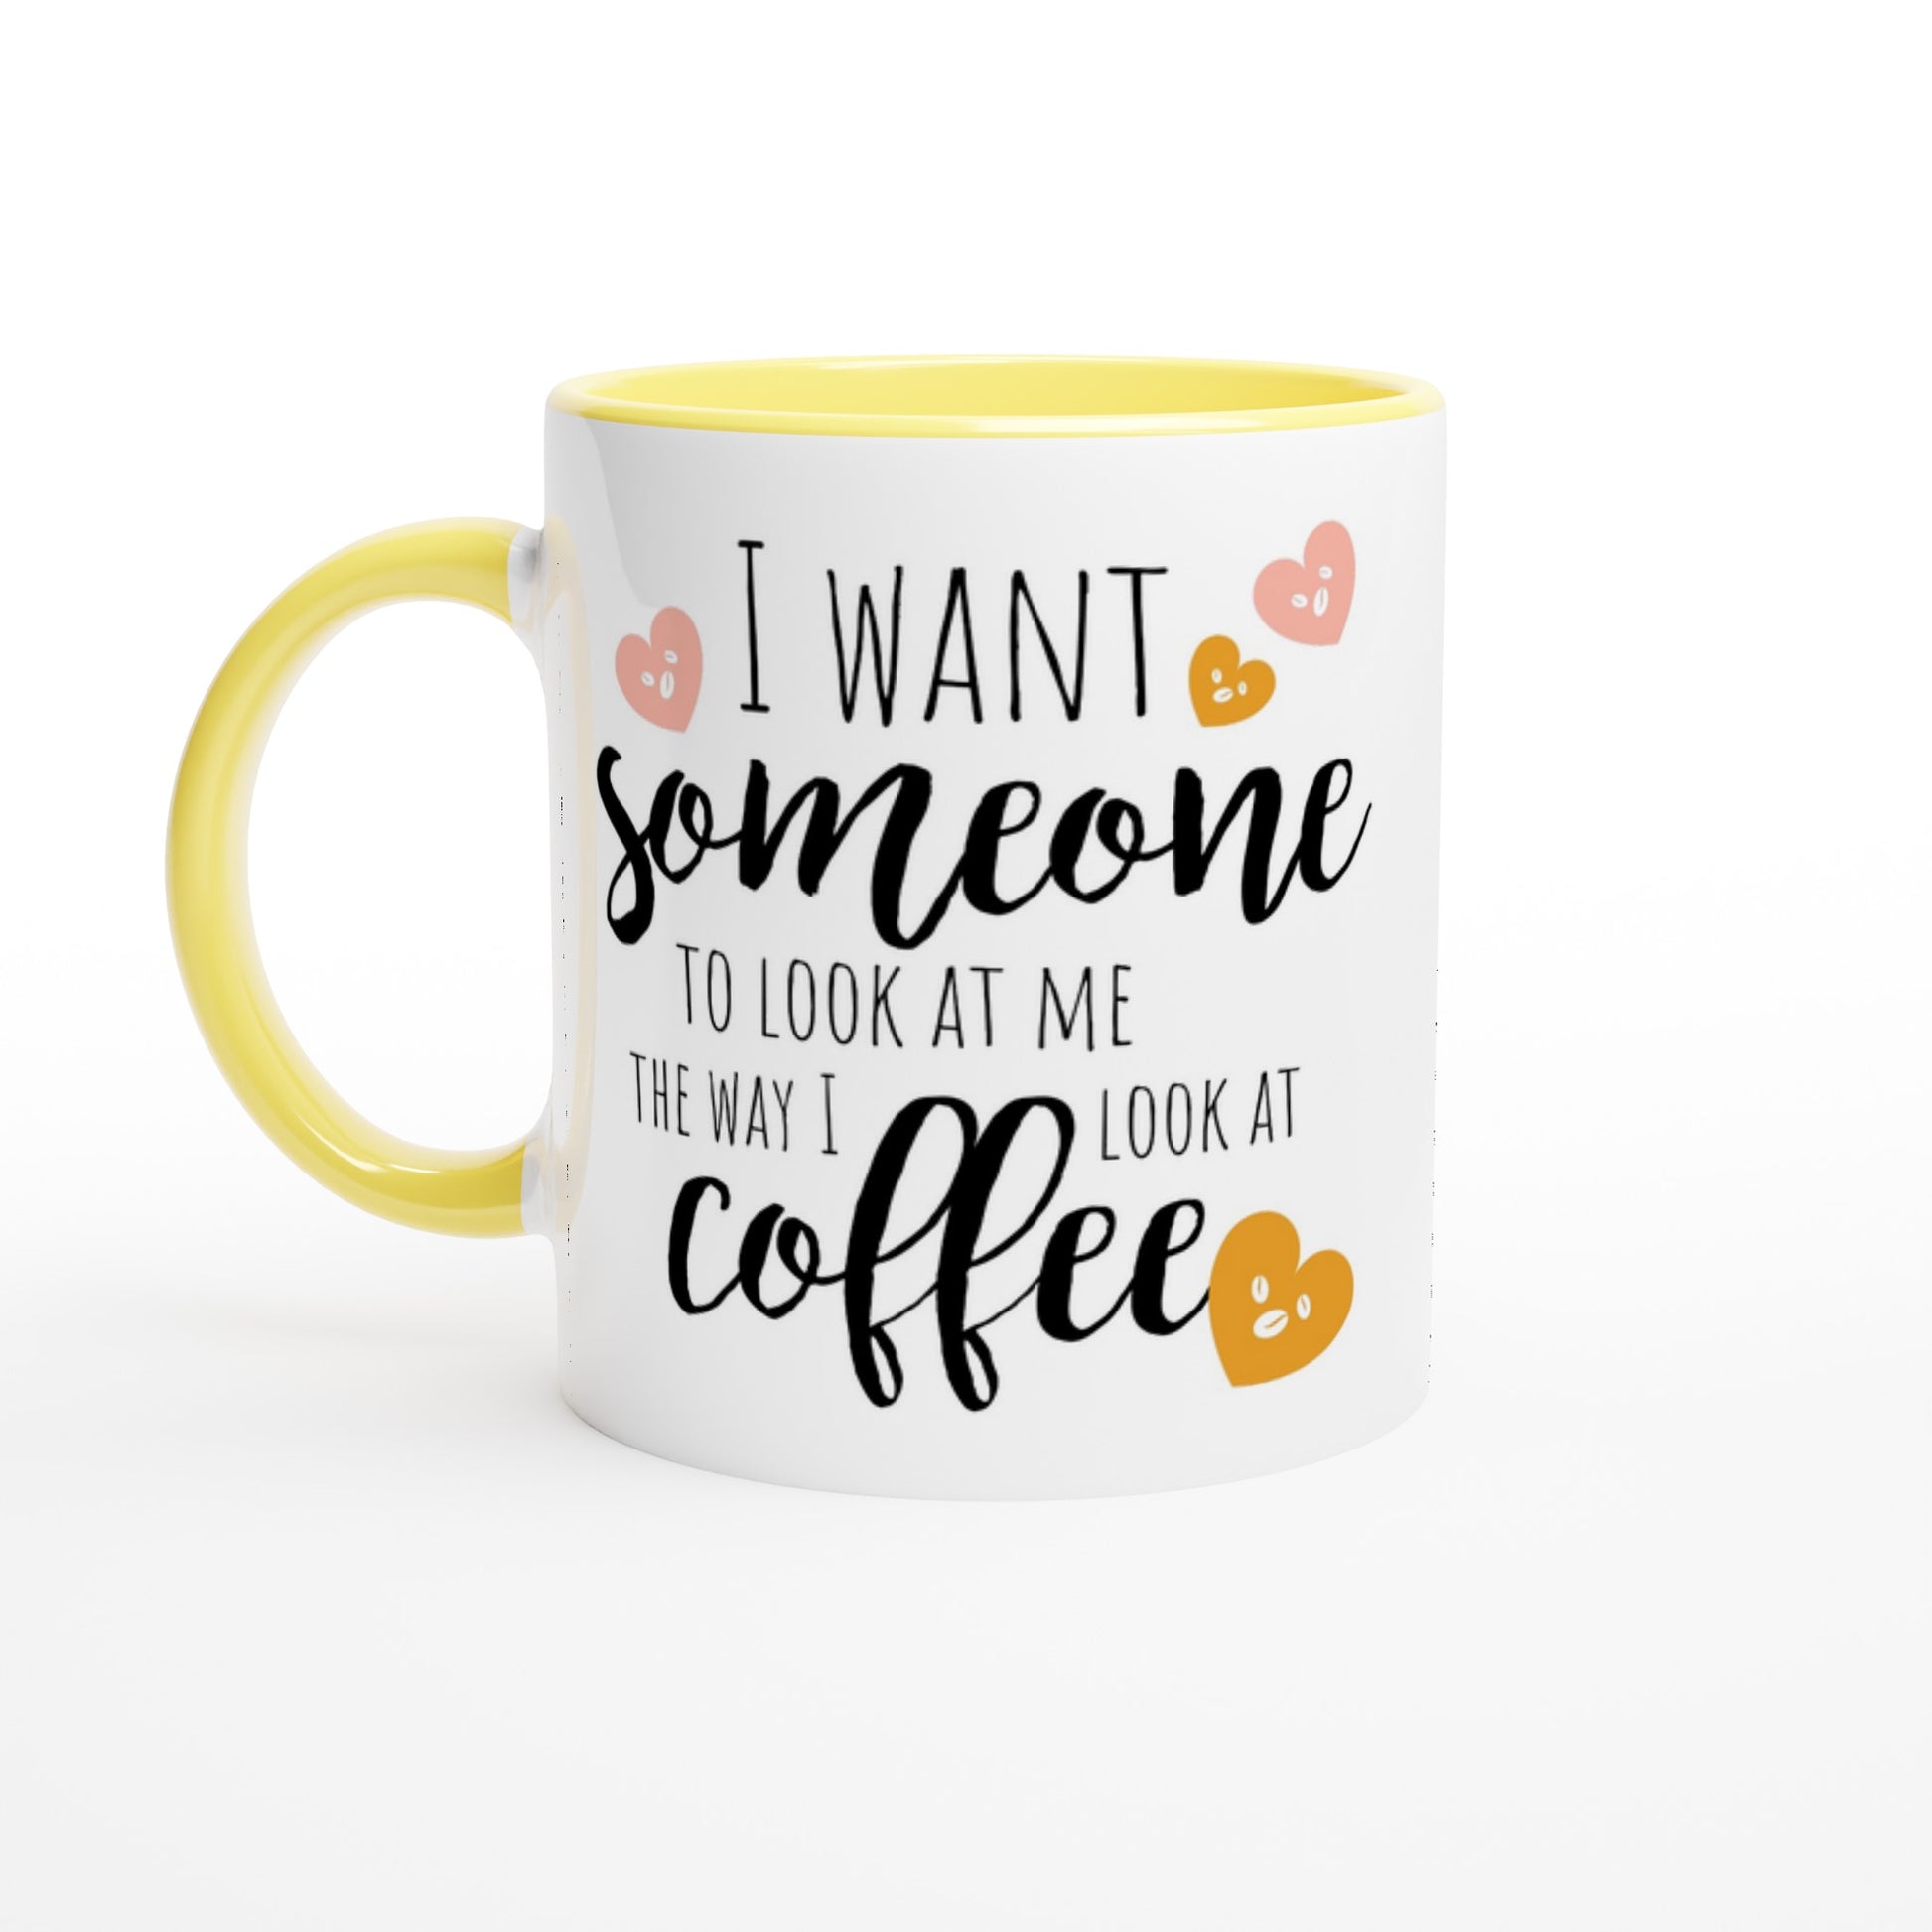 I Want Someone To Look At Me The Way I Look At Coffee - White 11oz Ceramic Mug with Colour Inside Ceramic Yellow Colour 11oz Mug coffee